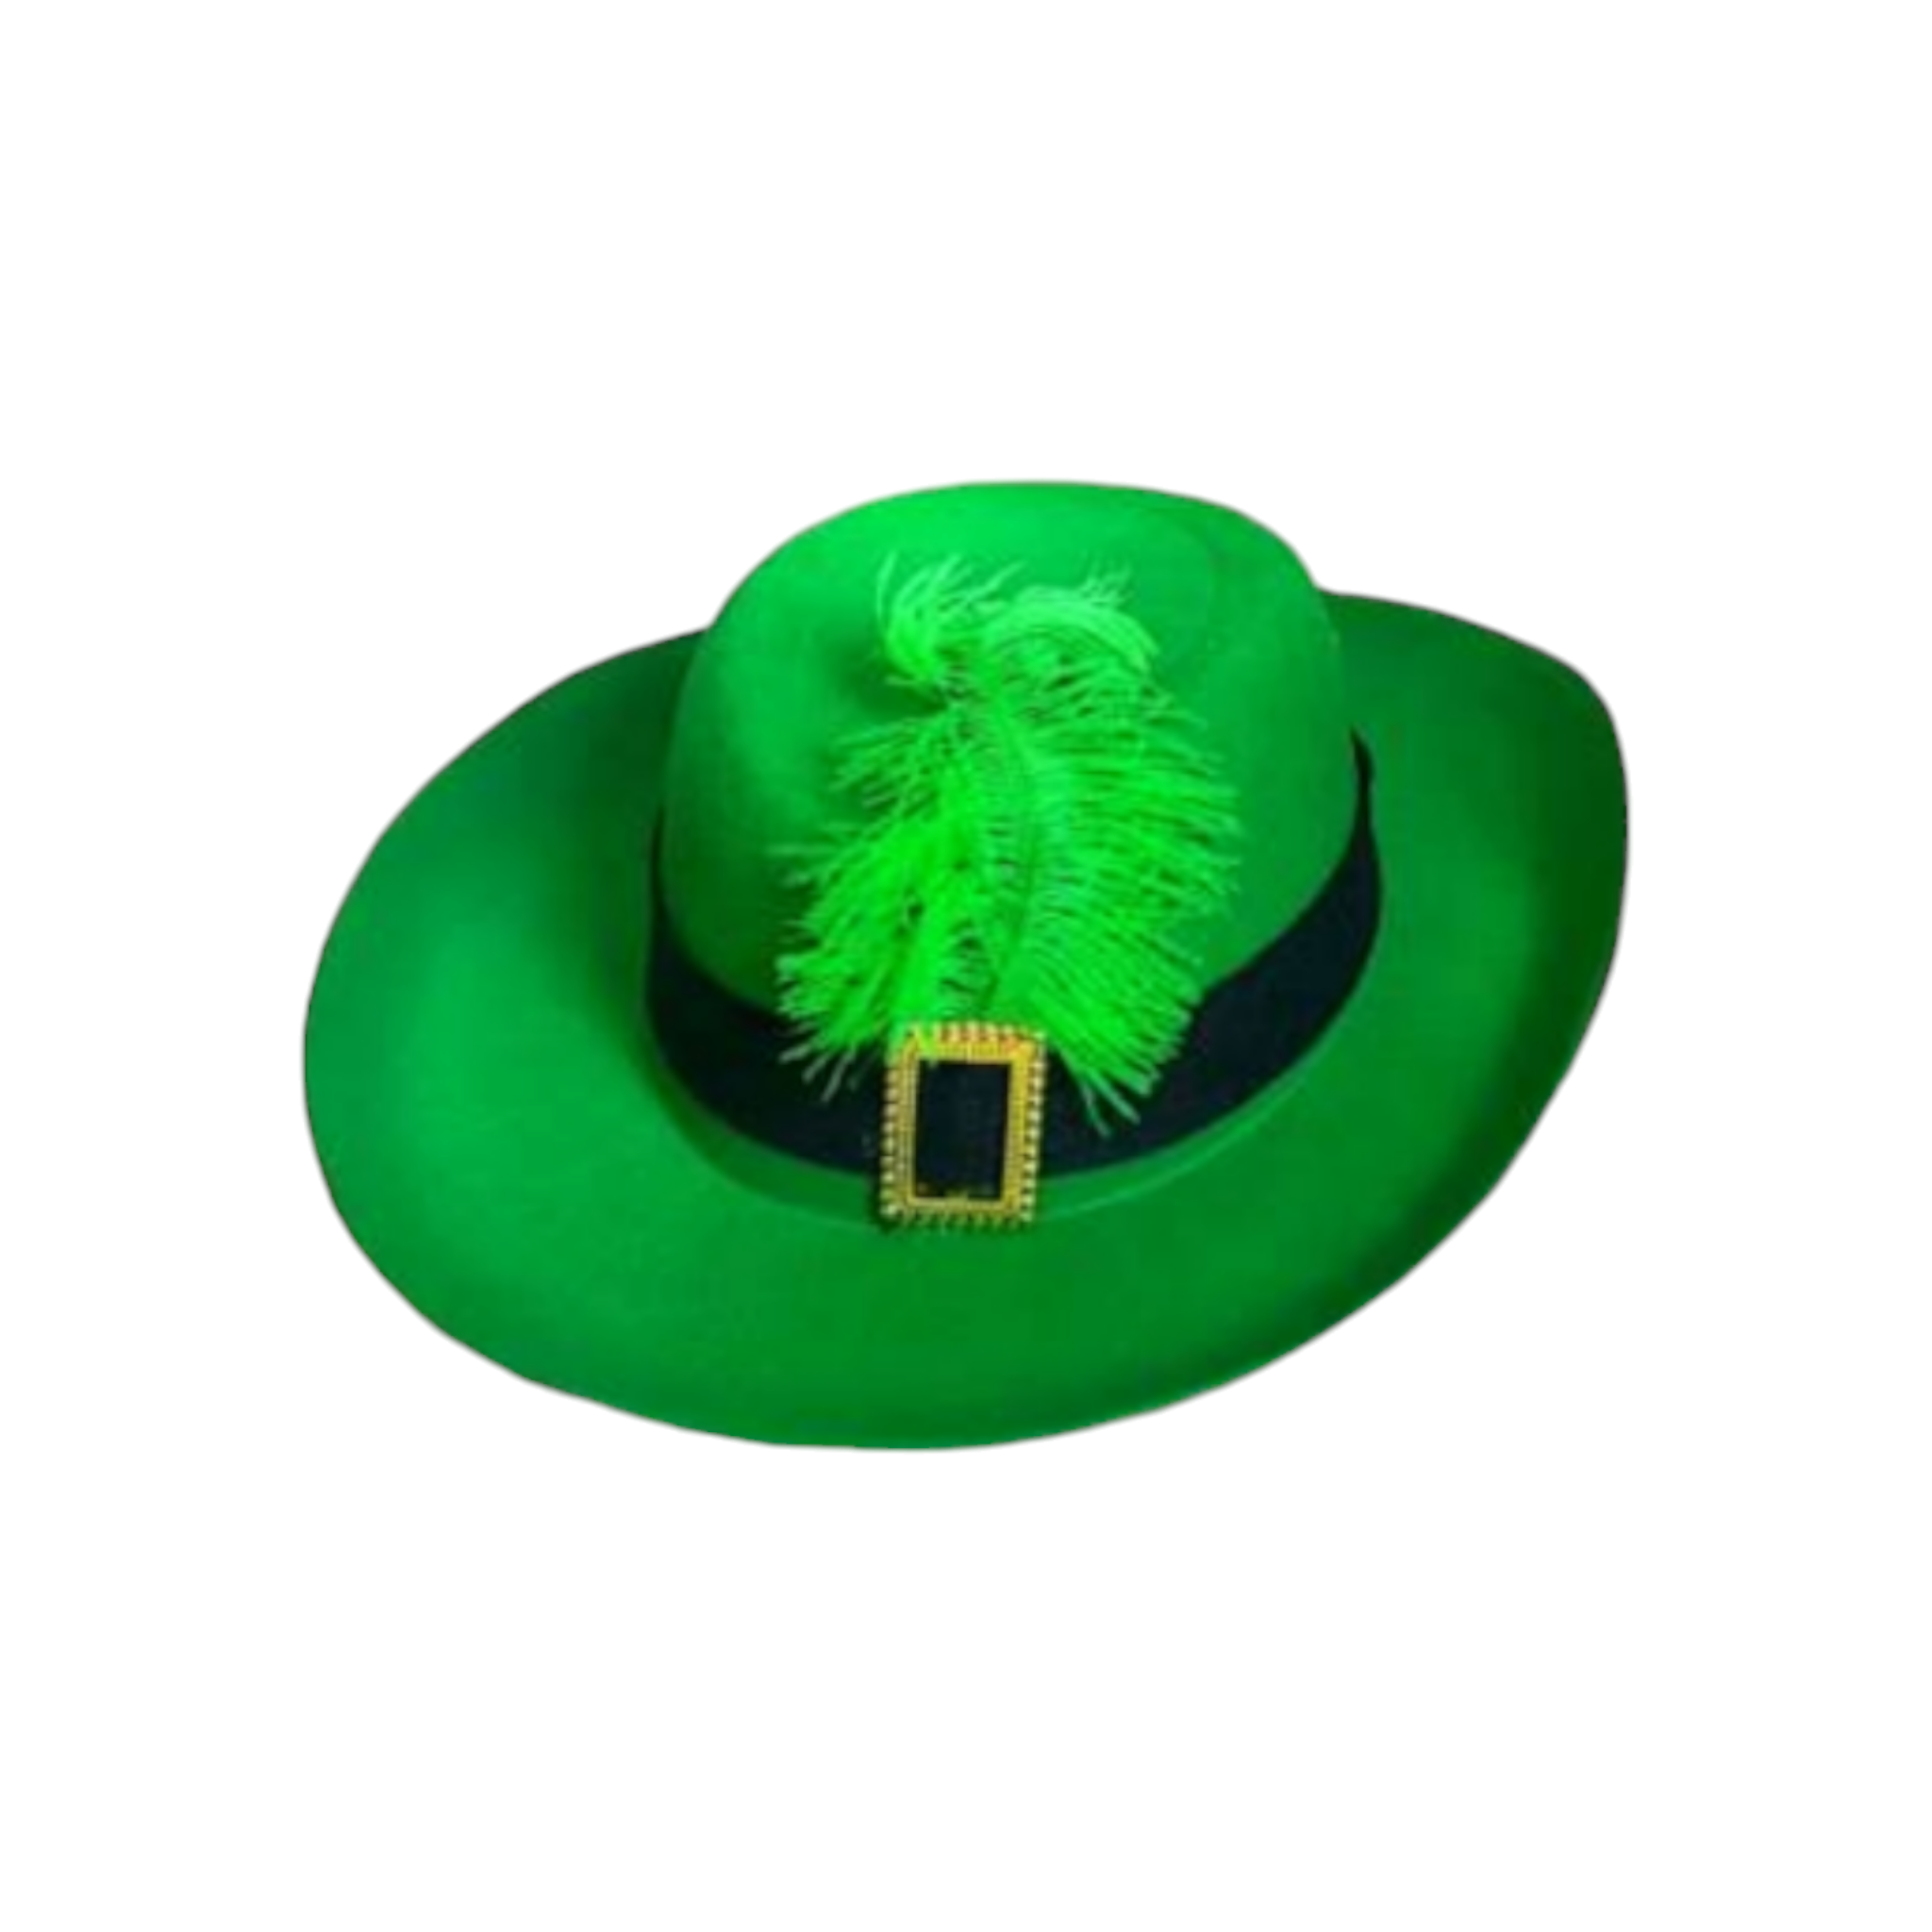 Kids Party Dressup Cowboy Musketeers Hat